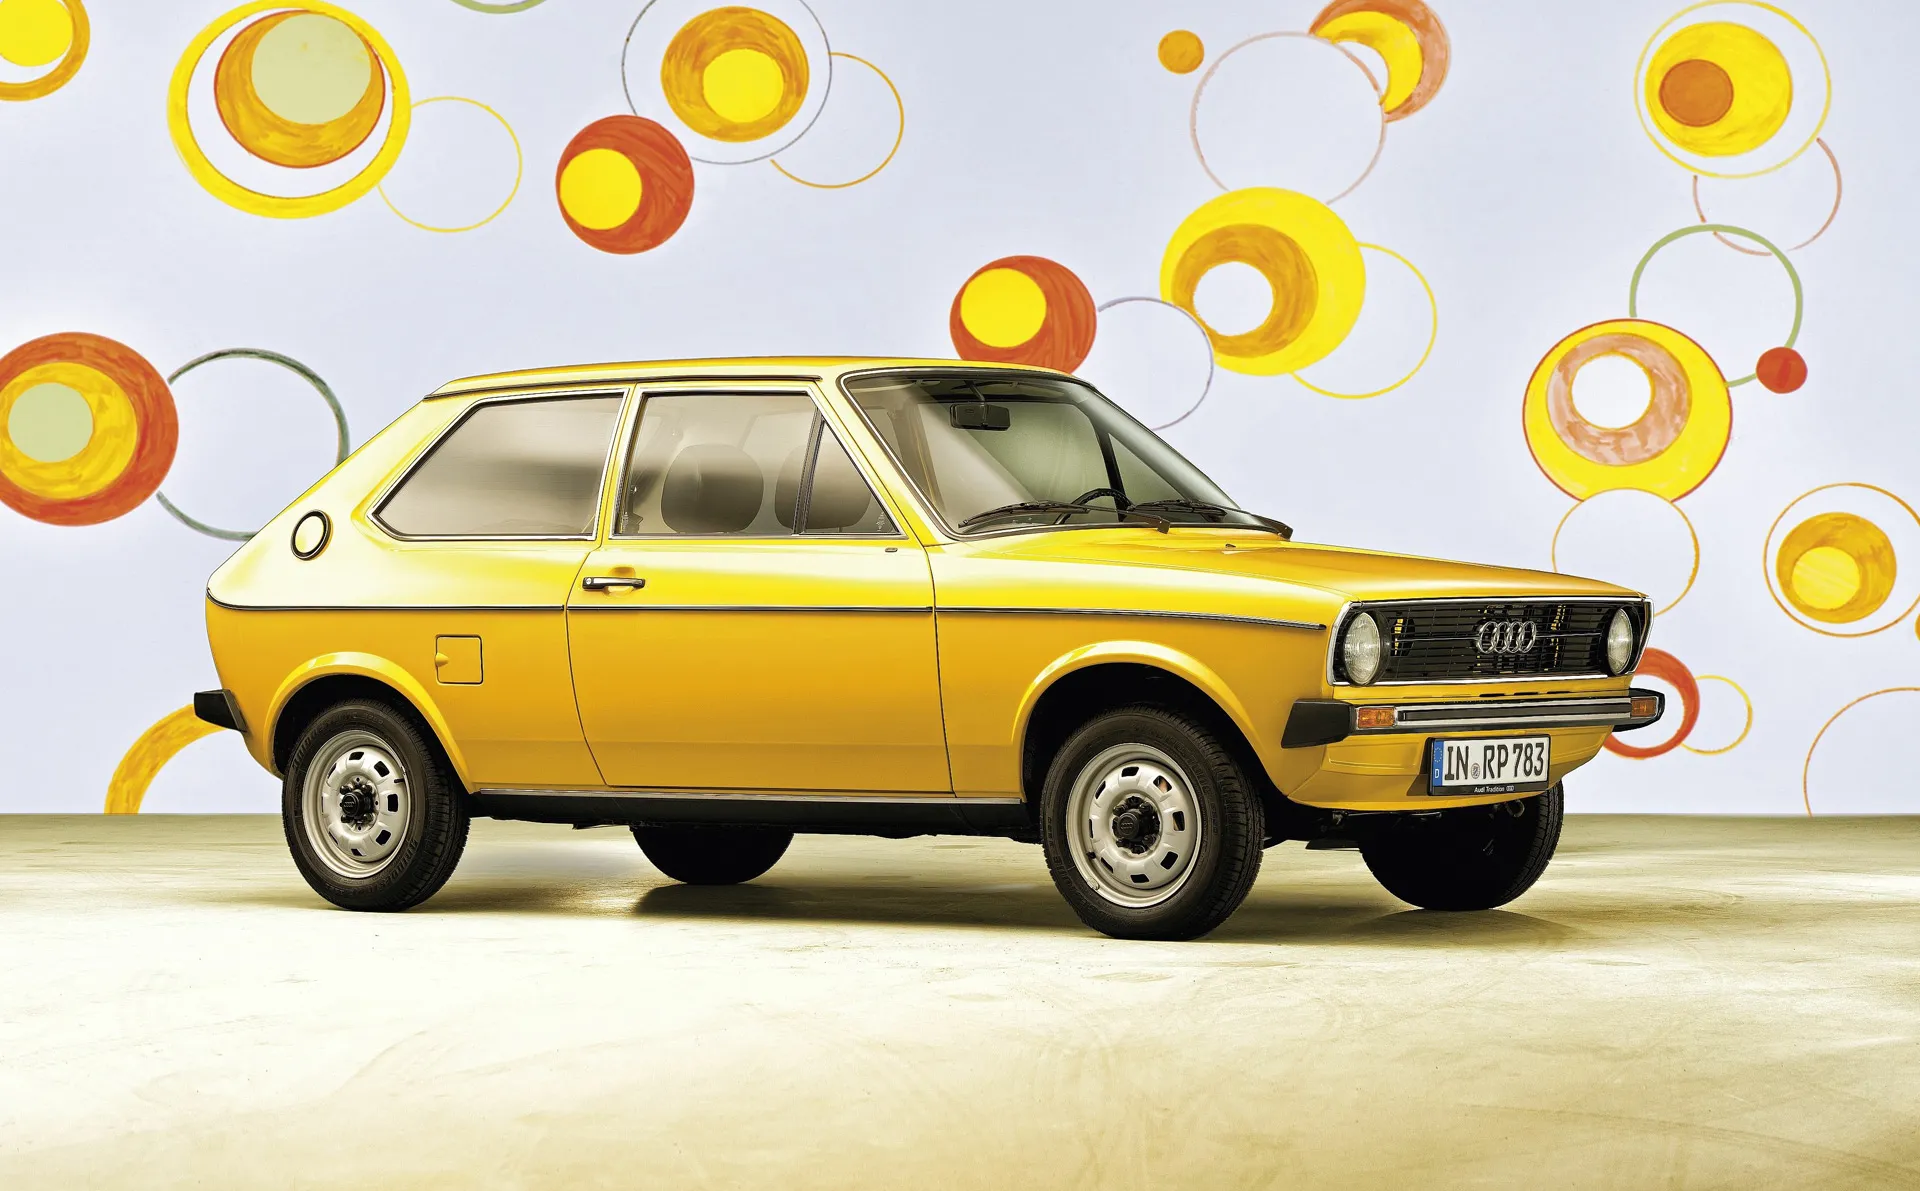 Audi's little-known subcompact hatch turns 50